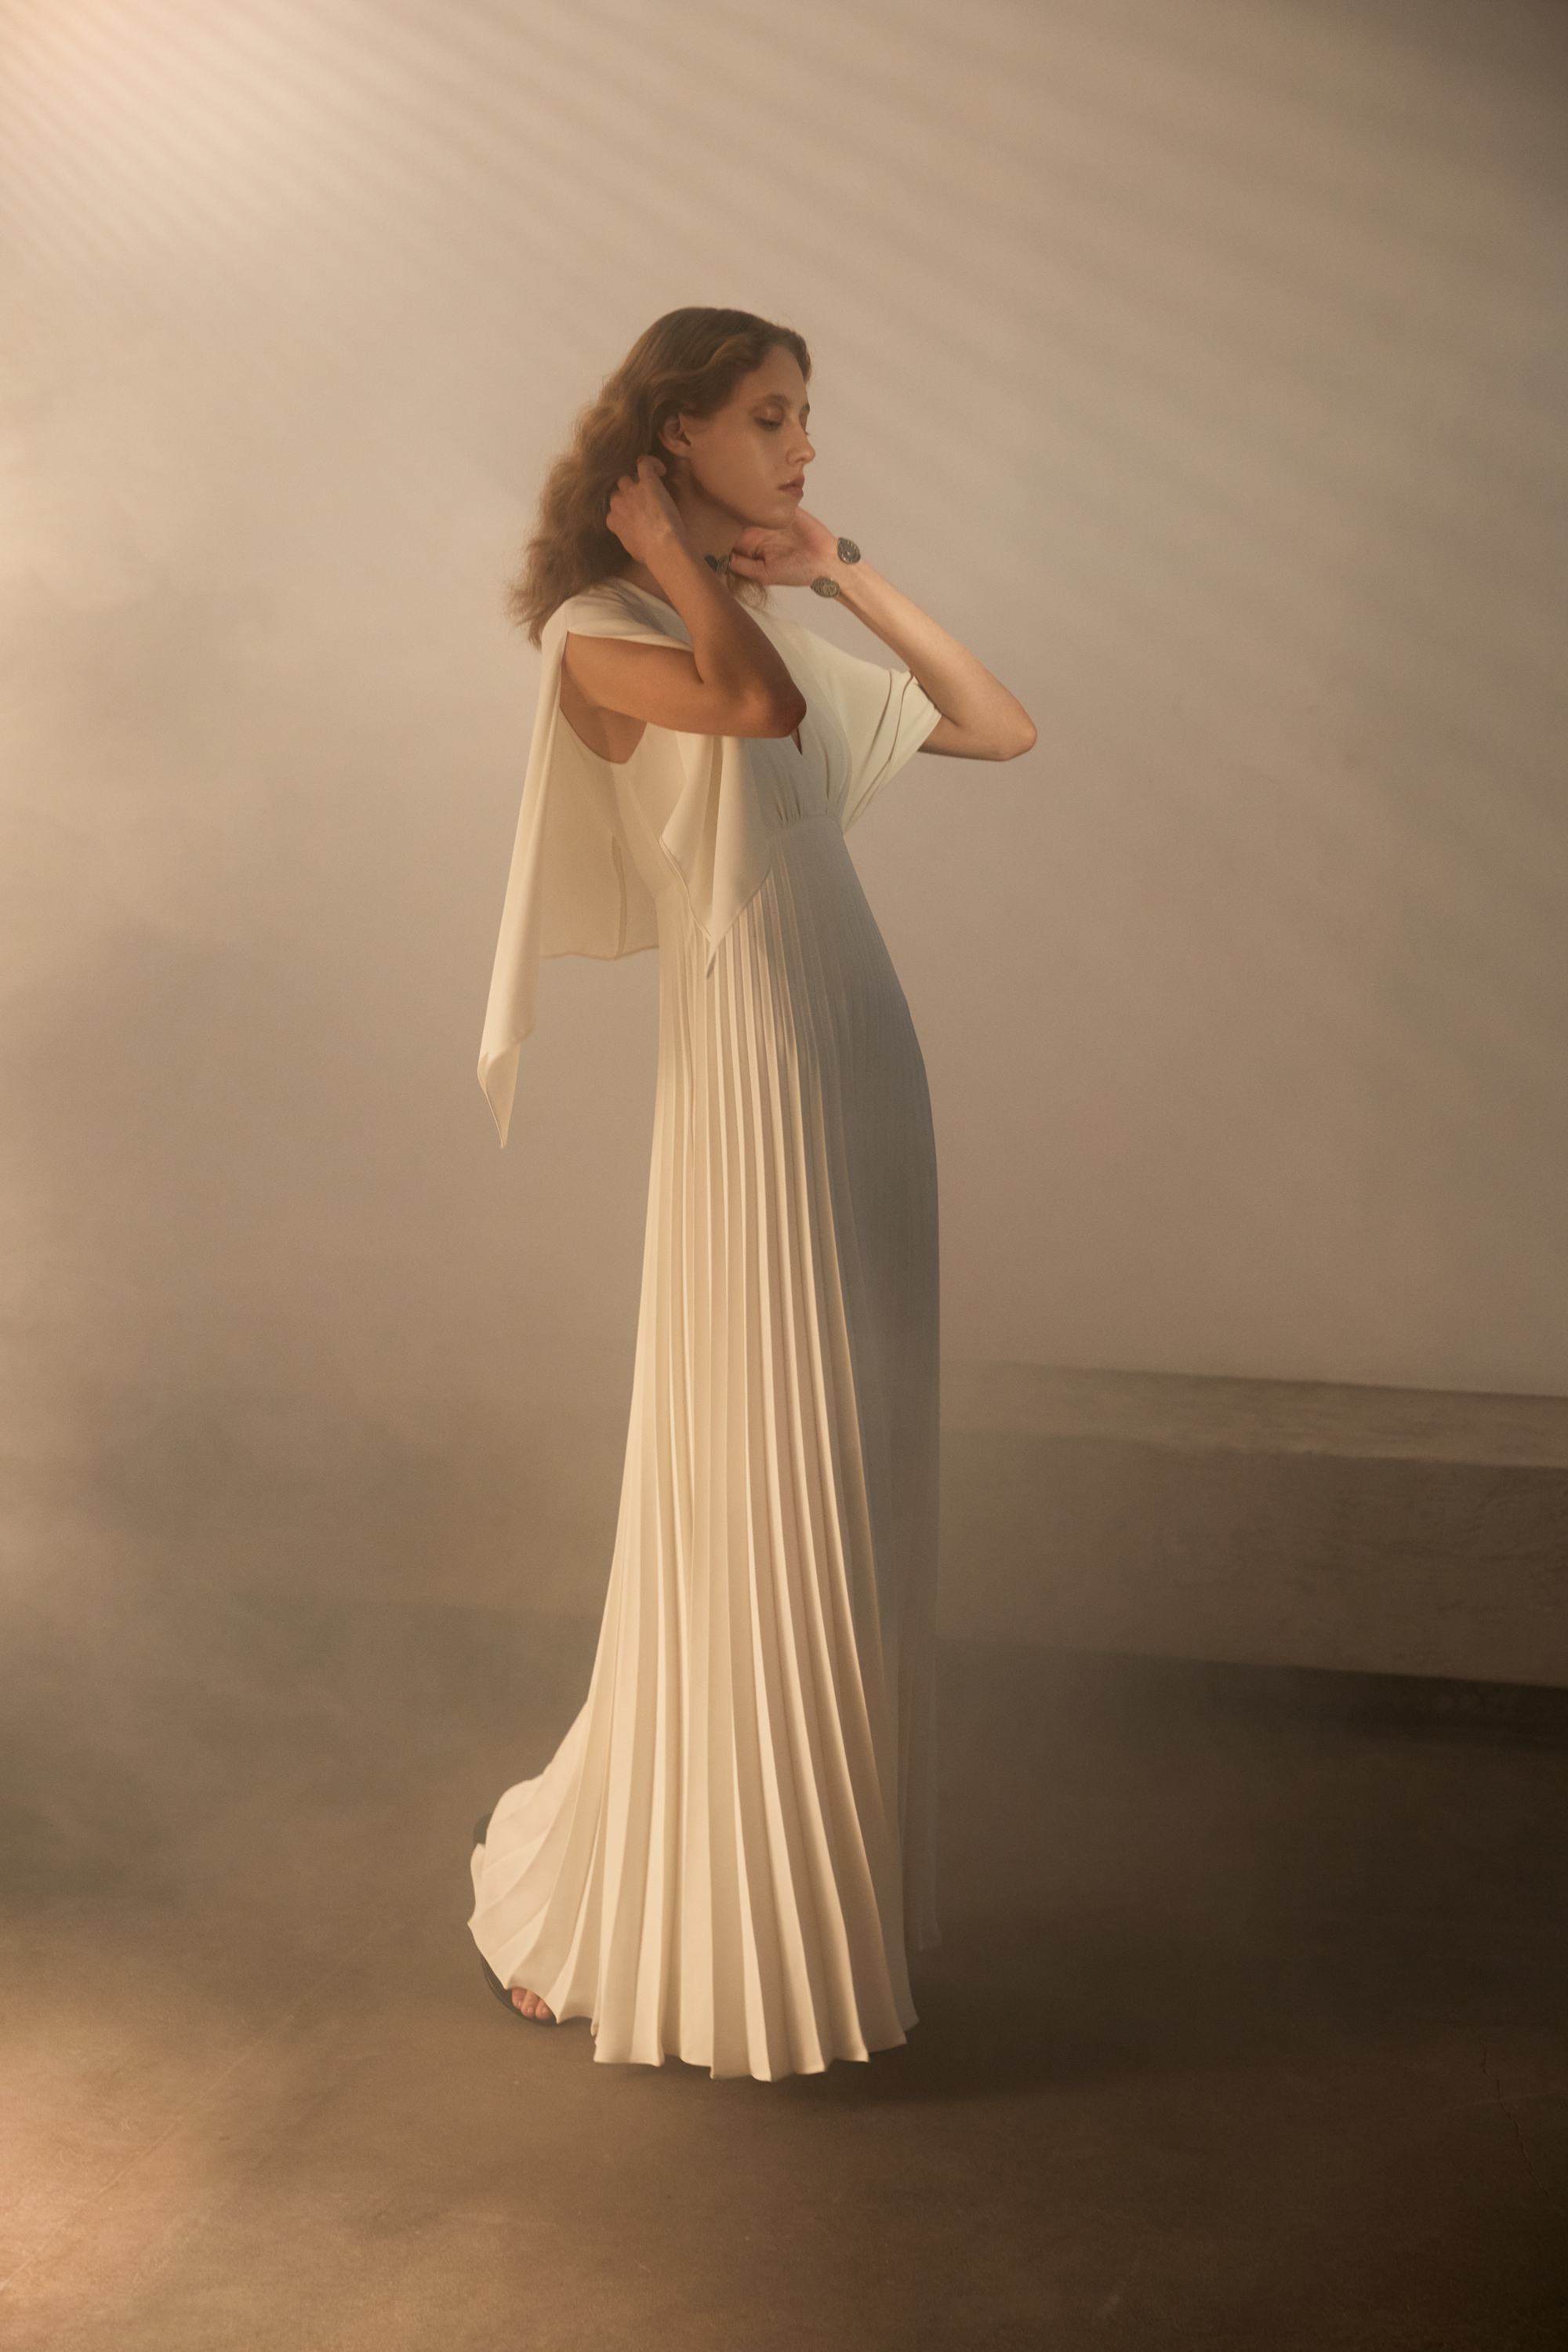 Aphaia dress, Resort '22 campaign- Photo by Yiannis Bournias